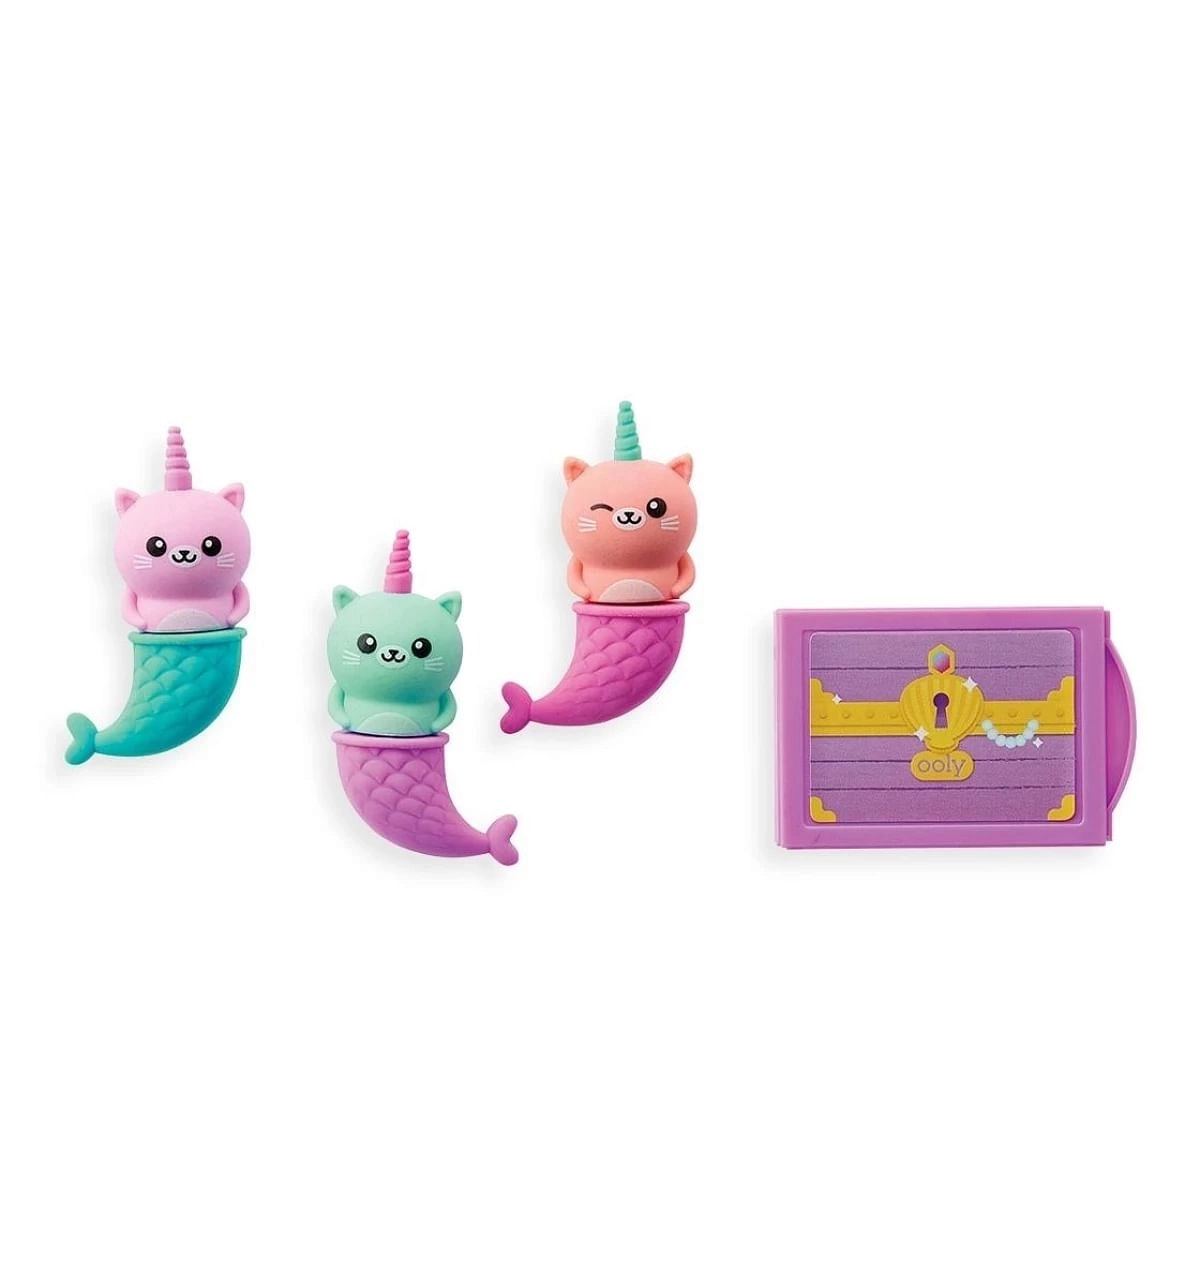 OOLY Mewmaid Treasure Scented Erasers, Erasers for Art, School, and Office Use, Classroom Set, 4 PC, Multicolour, 6Y+